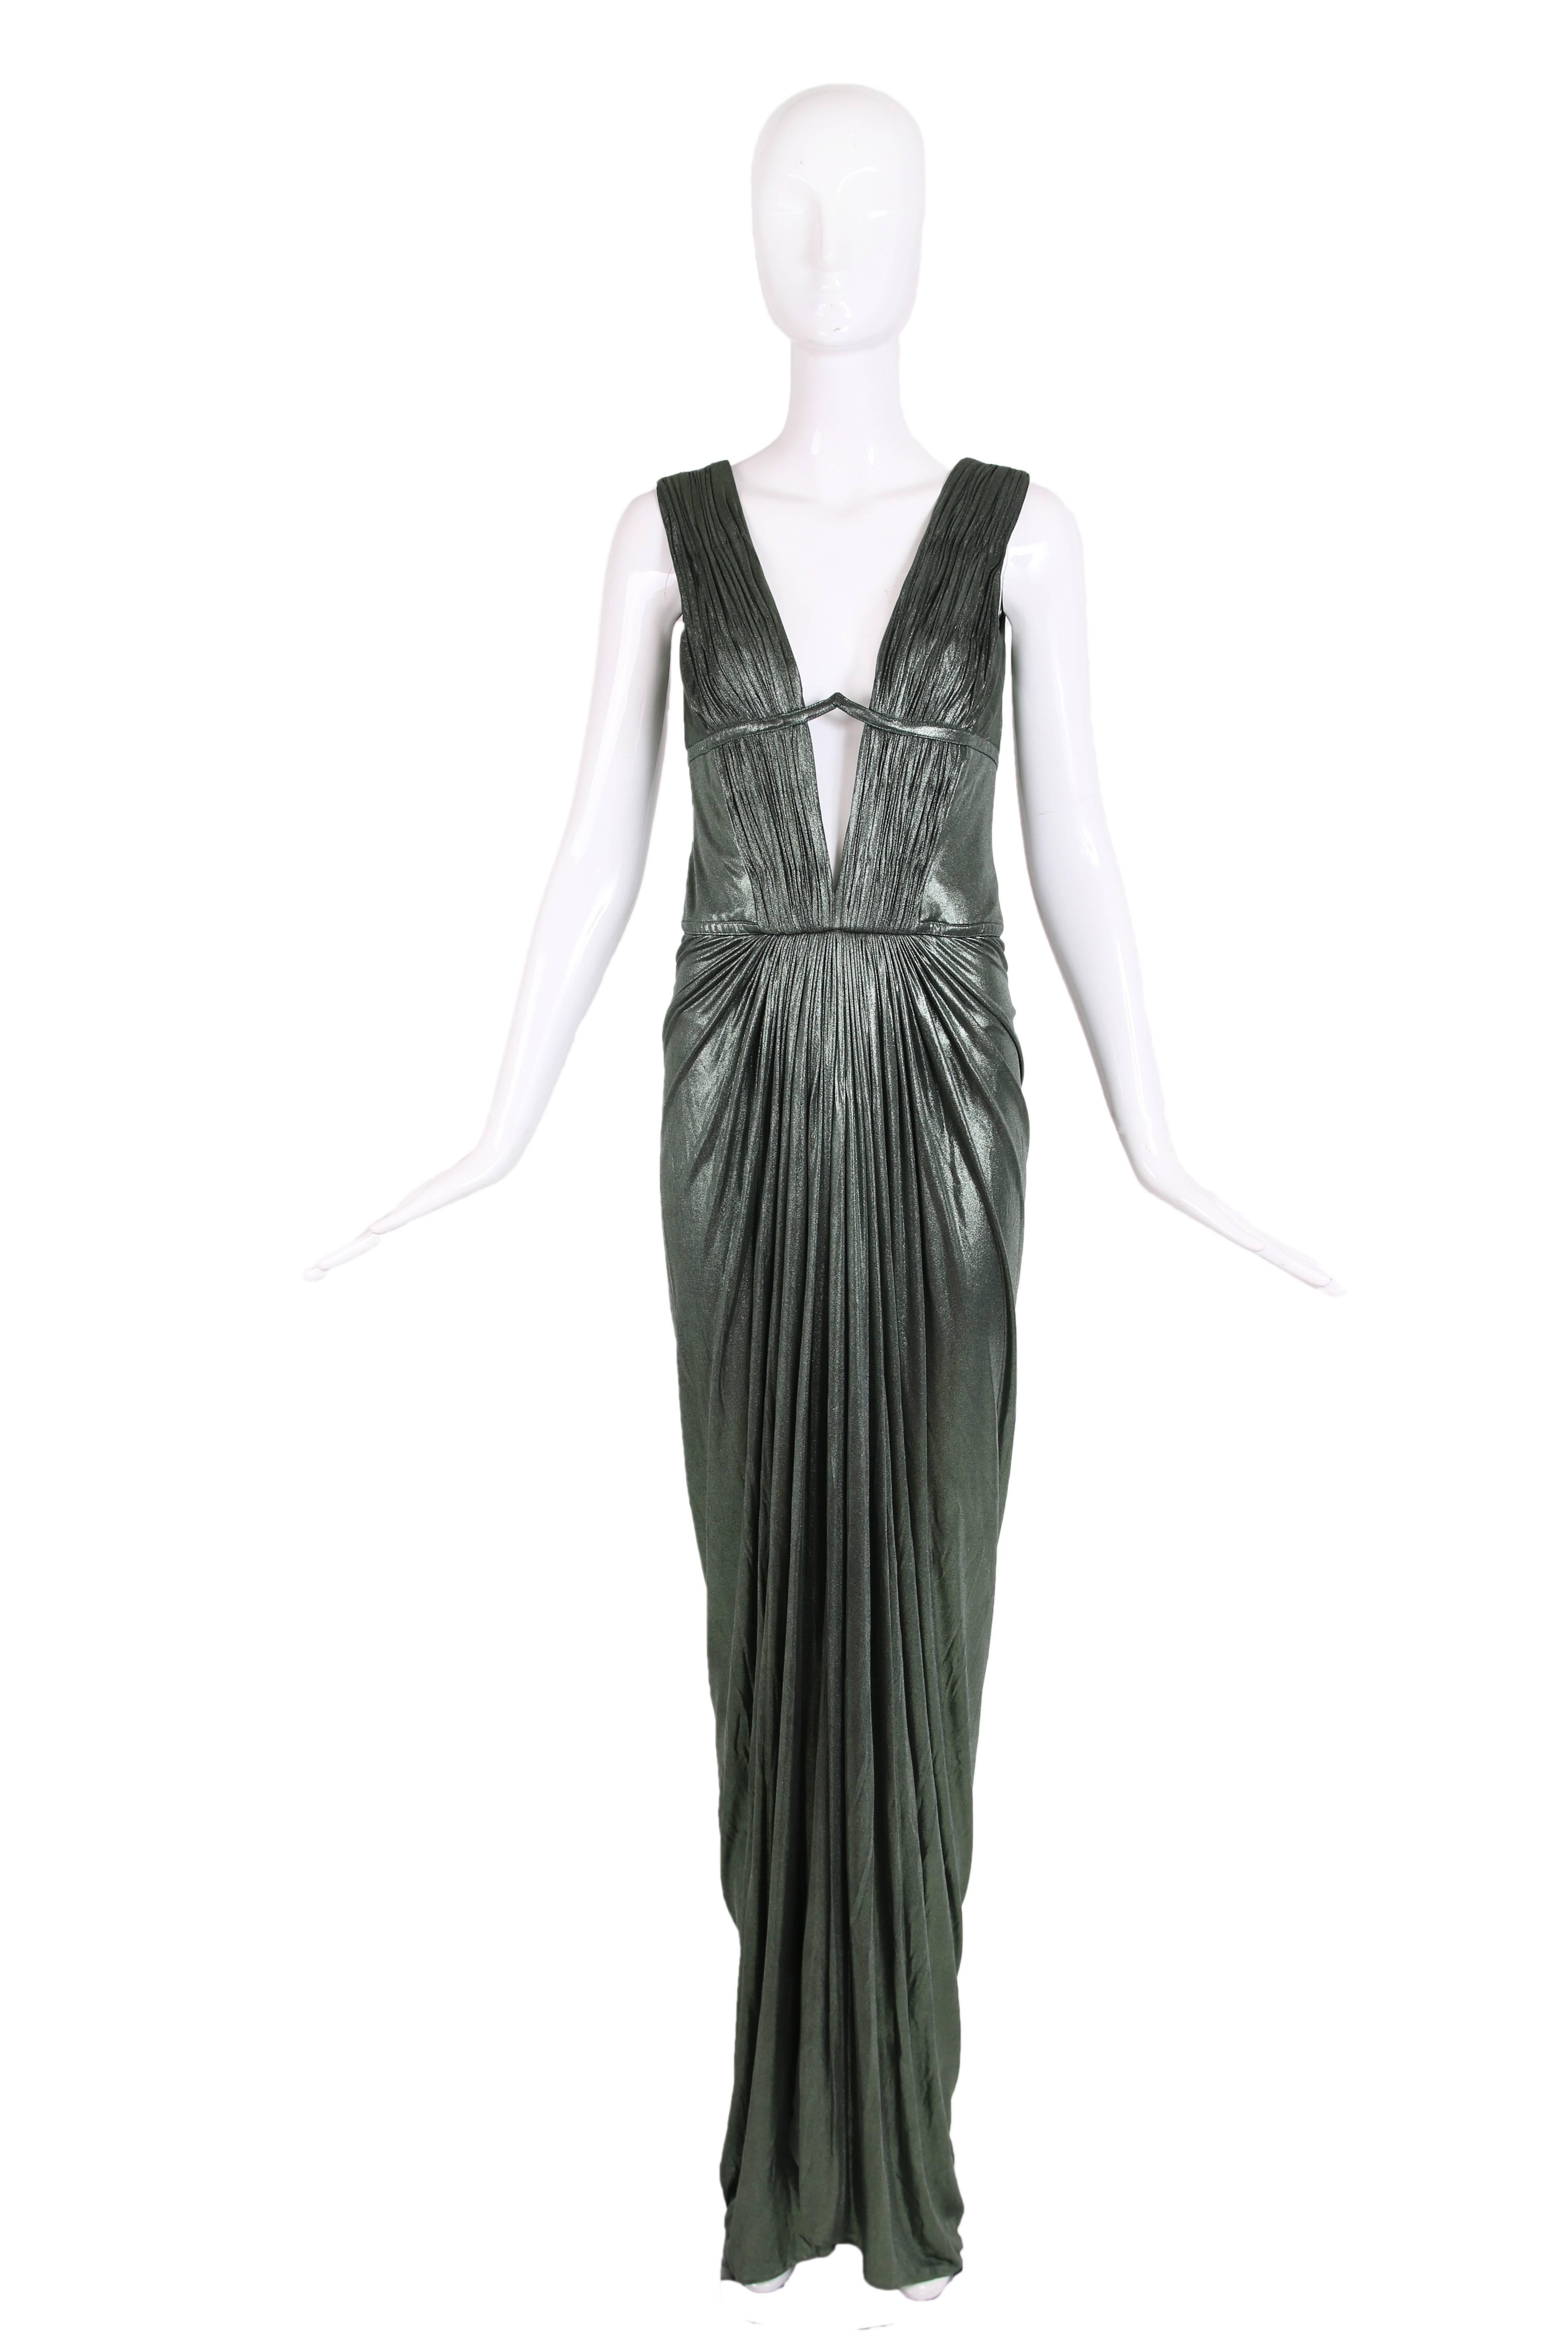 Roberto Cavalli mineral green metallic cupro stretch gown with boned bodice, frontal slit and back pleats held by shaped stiffened band. There is a body suit at the interior. In excellent condition. Size 40 - please consult